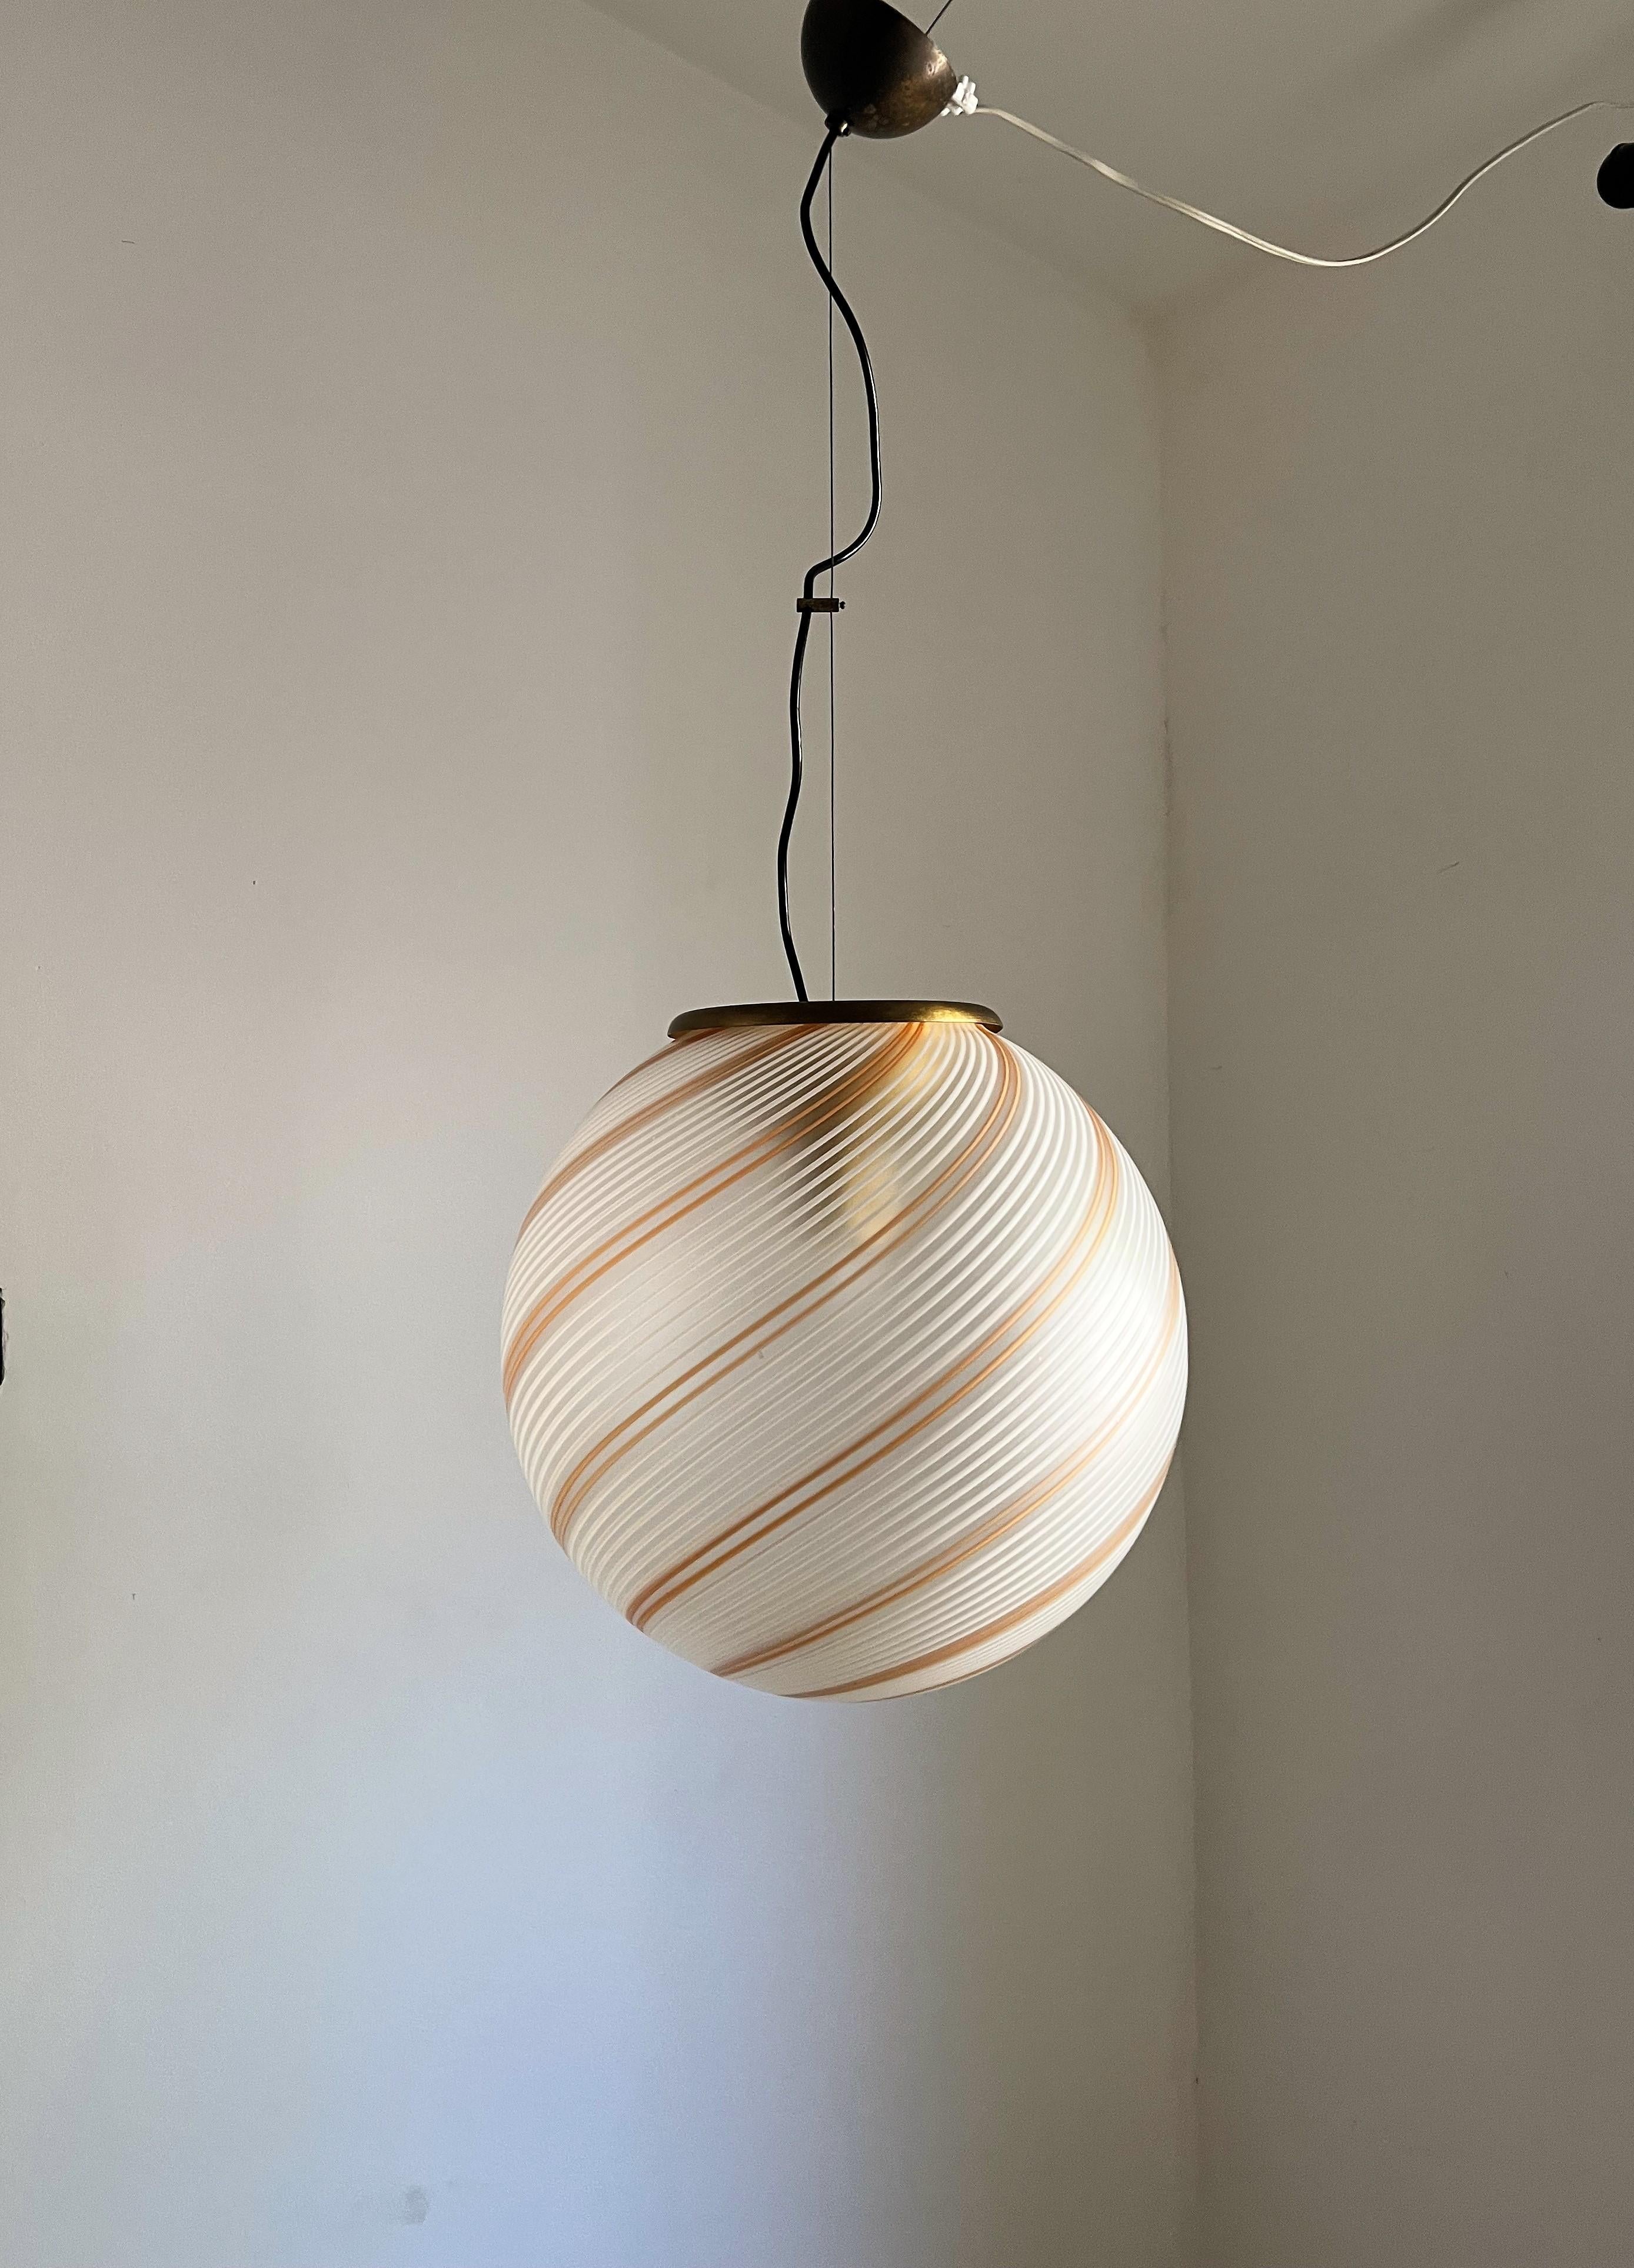 Beautiful and large pendant spheres in white, cream - orange, and clear hand-blown Murano glass in a satin finish, in the style of Venini, circa 1970s
We have 2 identical spheres ( slight variations as they are hand made), Hardware is slightly